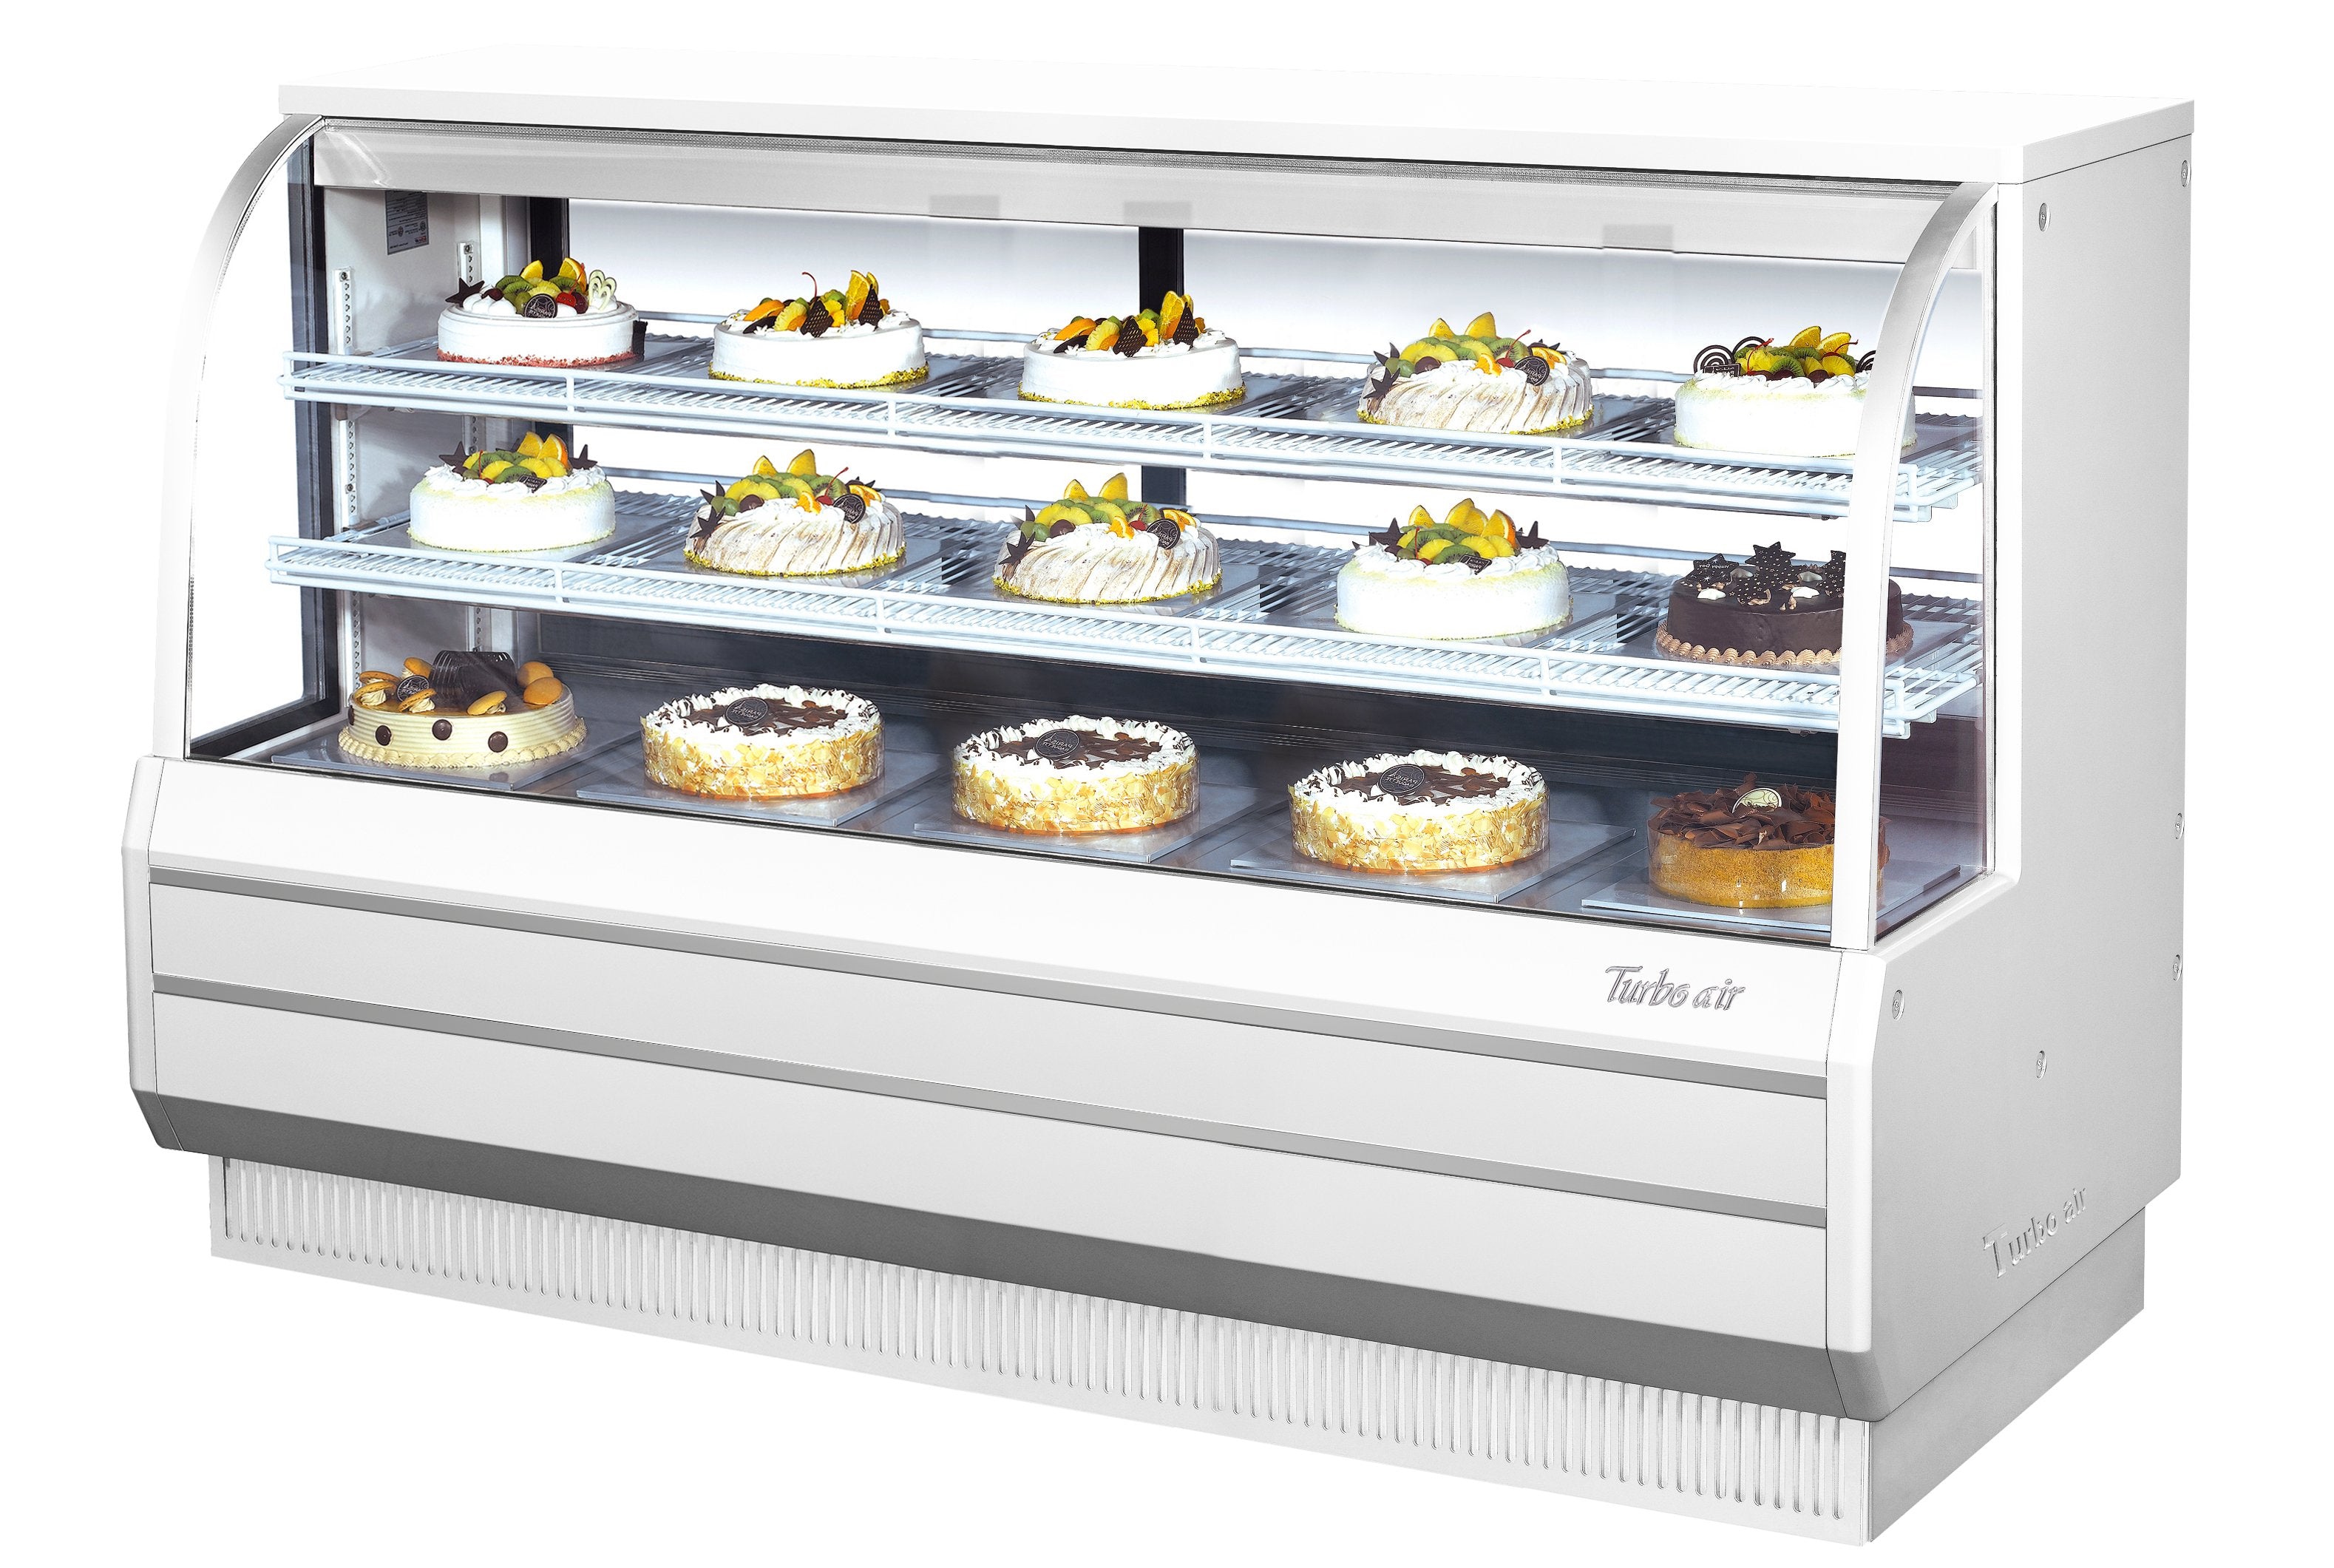 Turbo Air TCGB-72-W-N 6' Bakery Case-Refrigerated - White